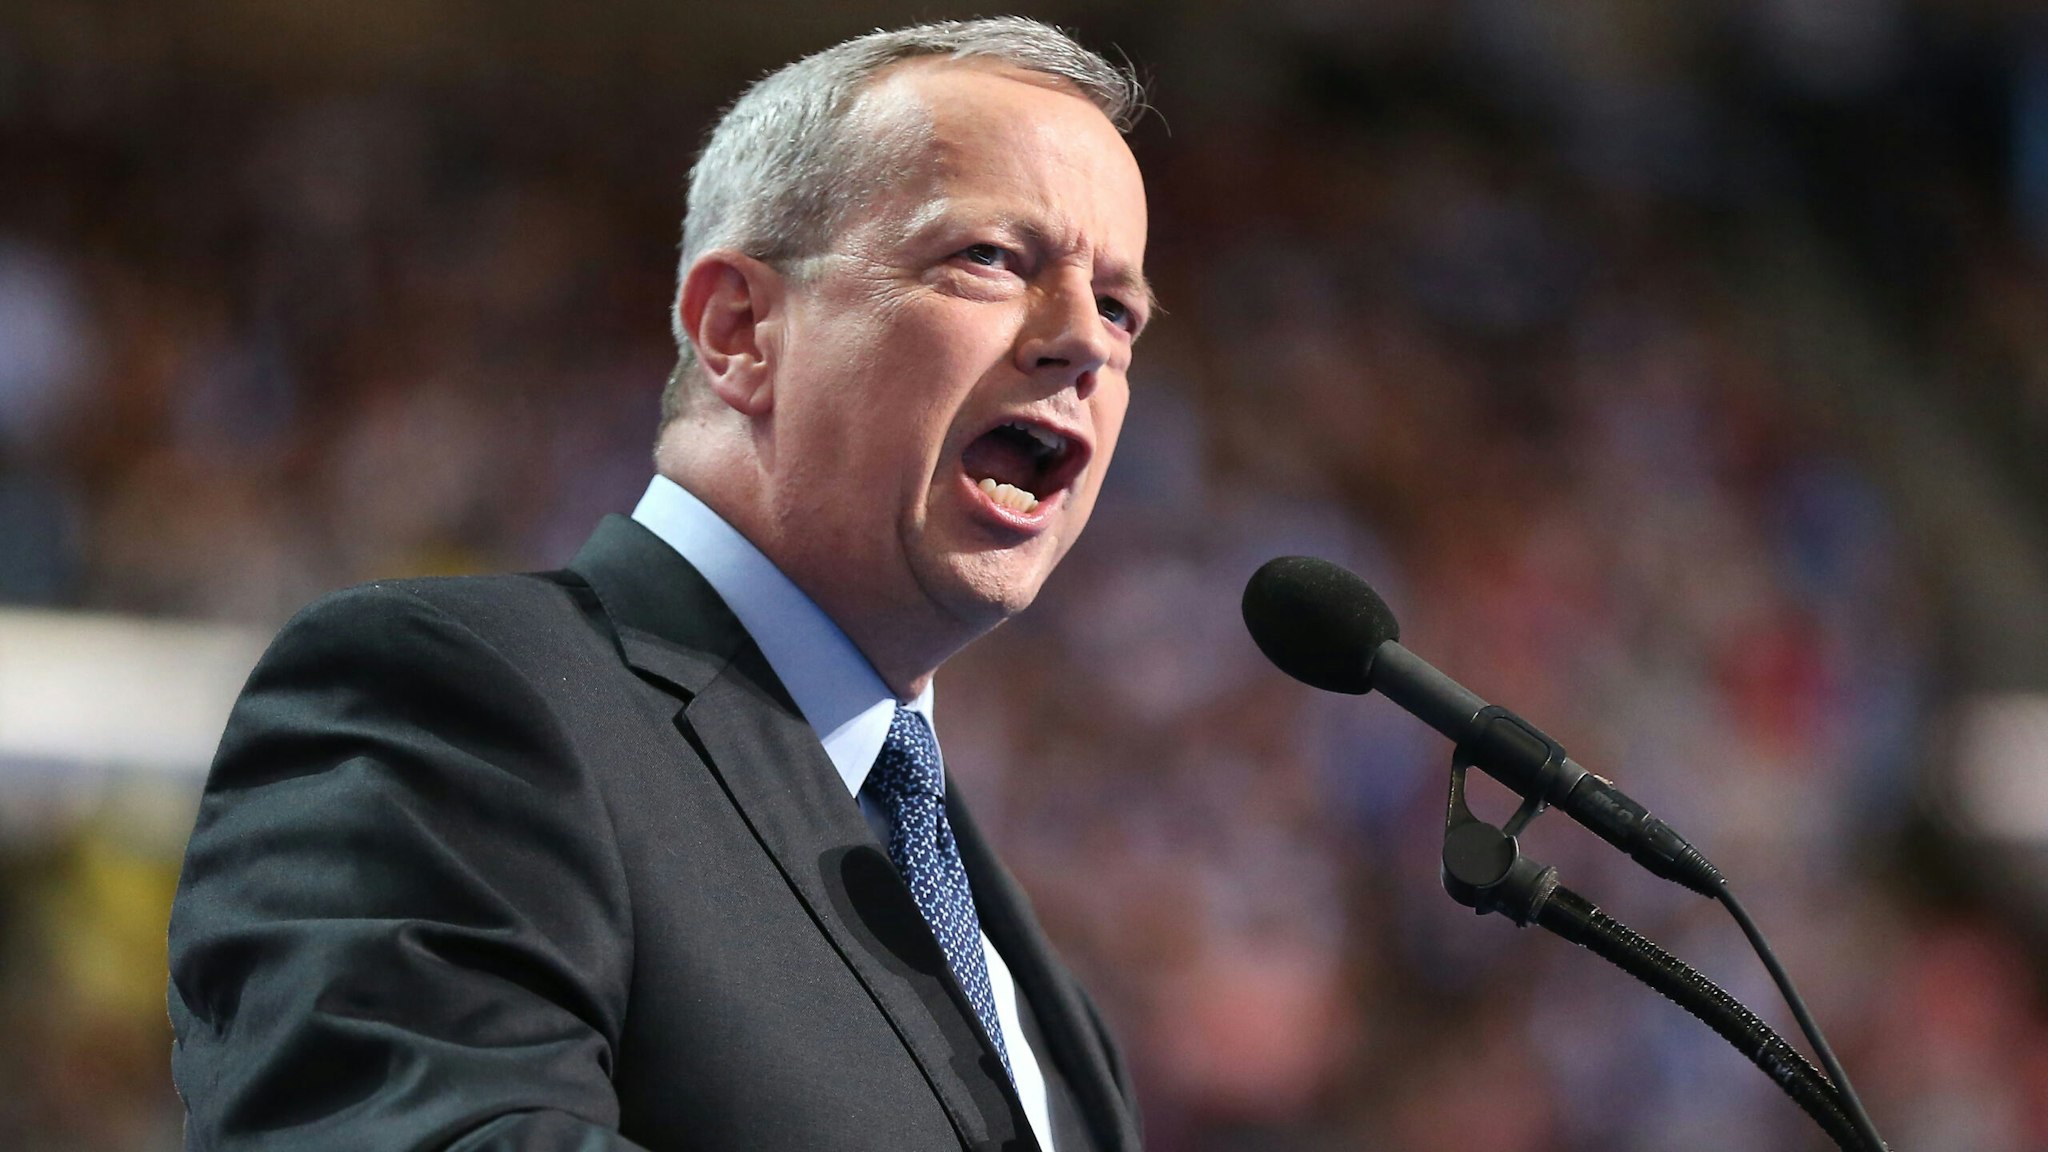 General John Allen, former commander of the International Security Assistance Forces, speaks during the Democratic National Convention (DNC) in Philadelphia, Pennsylvania, U.S., on Thursday, July 28, 2016. Division among Democrats has been overcome through speeches from two presidents, another first lady and a vice-president, who raised the stakes for their candidate by warning that her opponent posed an unprecedented threat to American diplomacy.